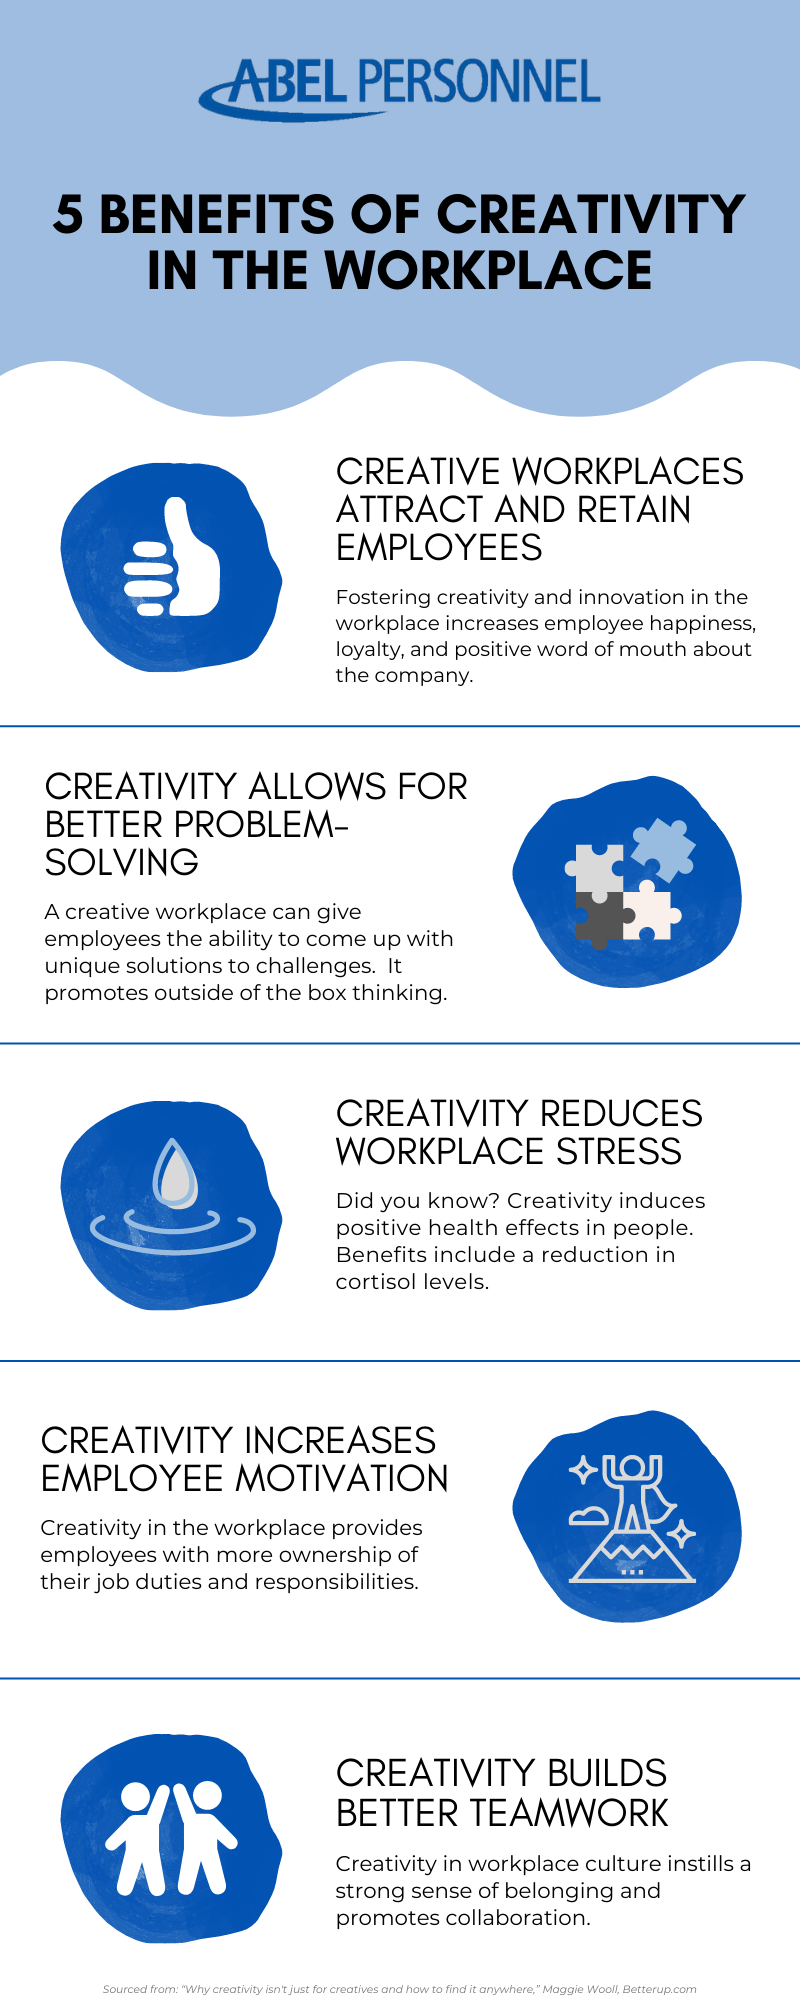 5 BENEFITS OF CREATIVITY IN THE WORKPLACE